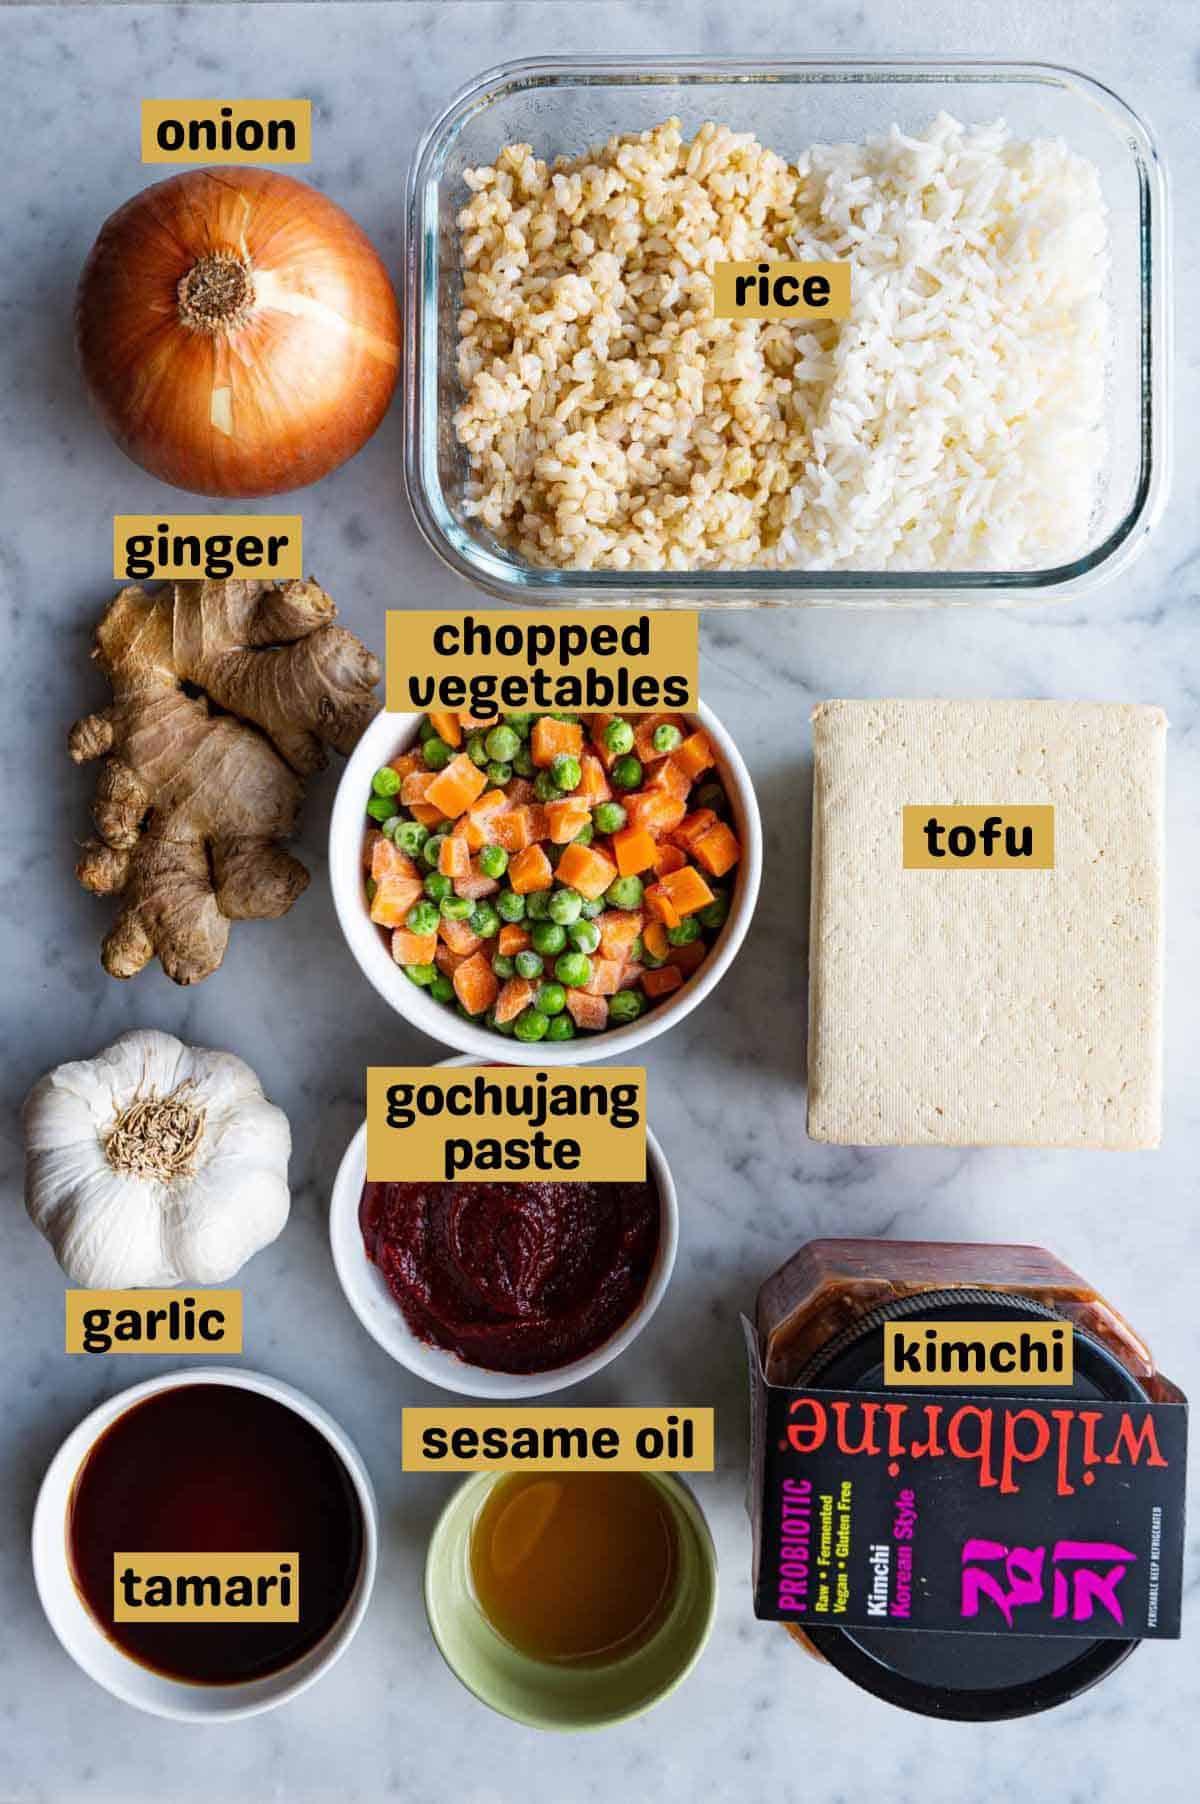 One yellow onion, brown and white rice in a rectangular glass container, chopped frozen carrots and peas in a white bowl, ginger, one block tofu, garlic, gochujang paste, sesame oil, tamari, and kimchi on a marble board.